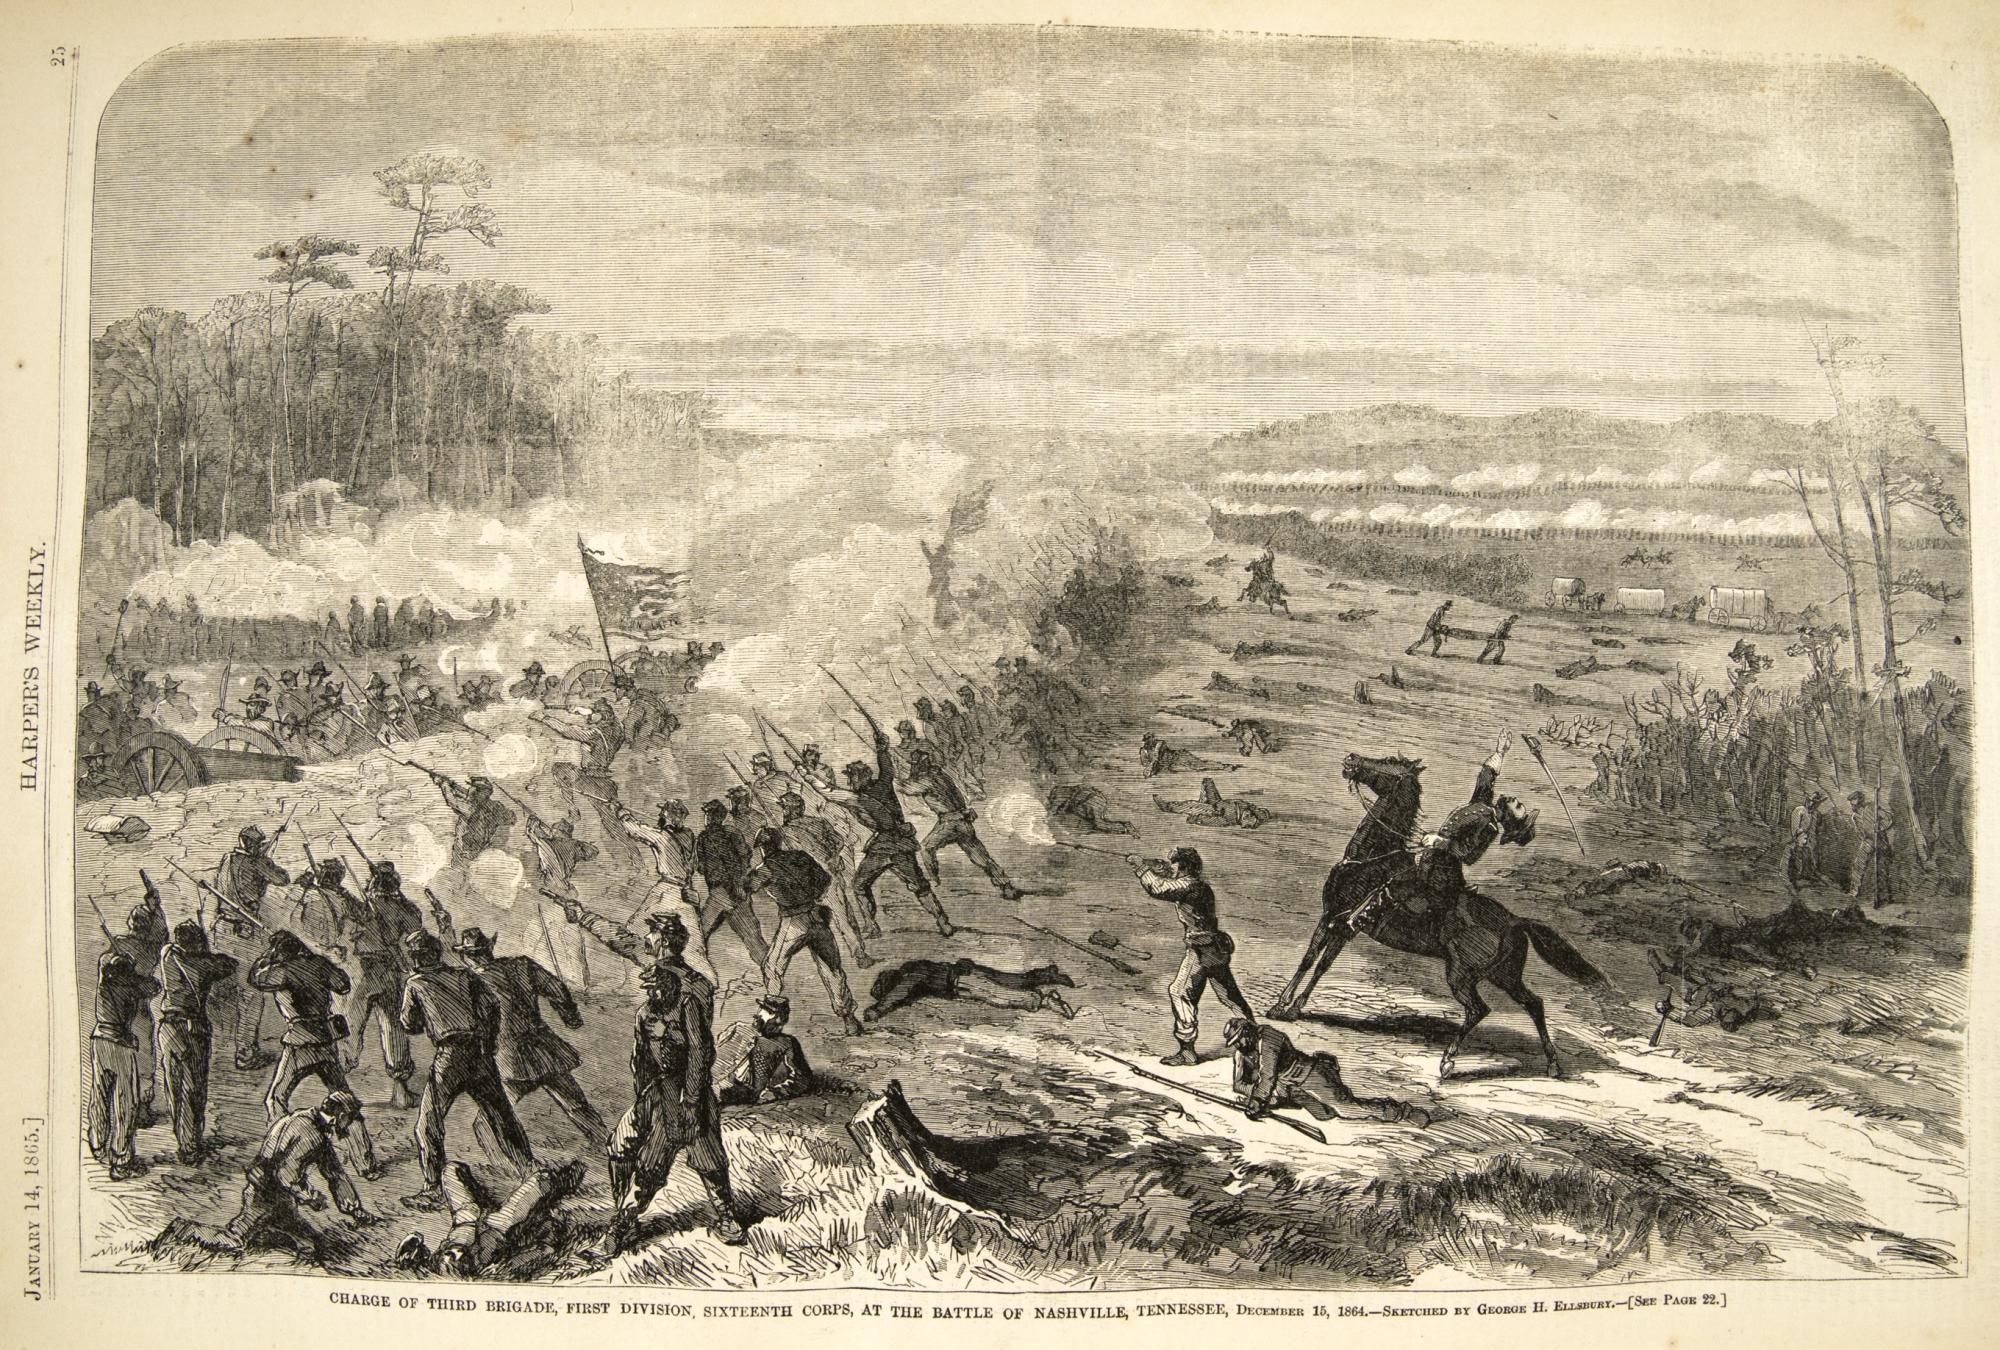 George H. Ellsbury, Charge of the Third Brigade, First Division, Sixteenth Corps, at the Battle of Nashville, Tennessee, December 15, 1864, from Harper's Weekly: A Journal of Civilization, January 14, 1865, p. 25 (Newberry Library)